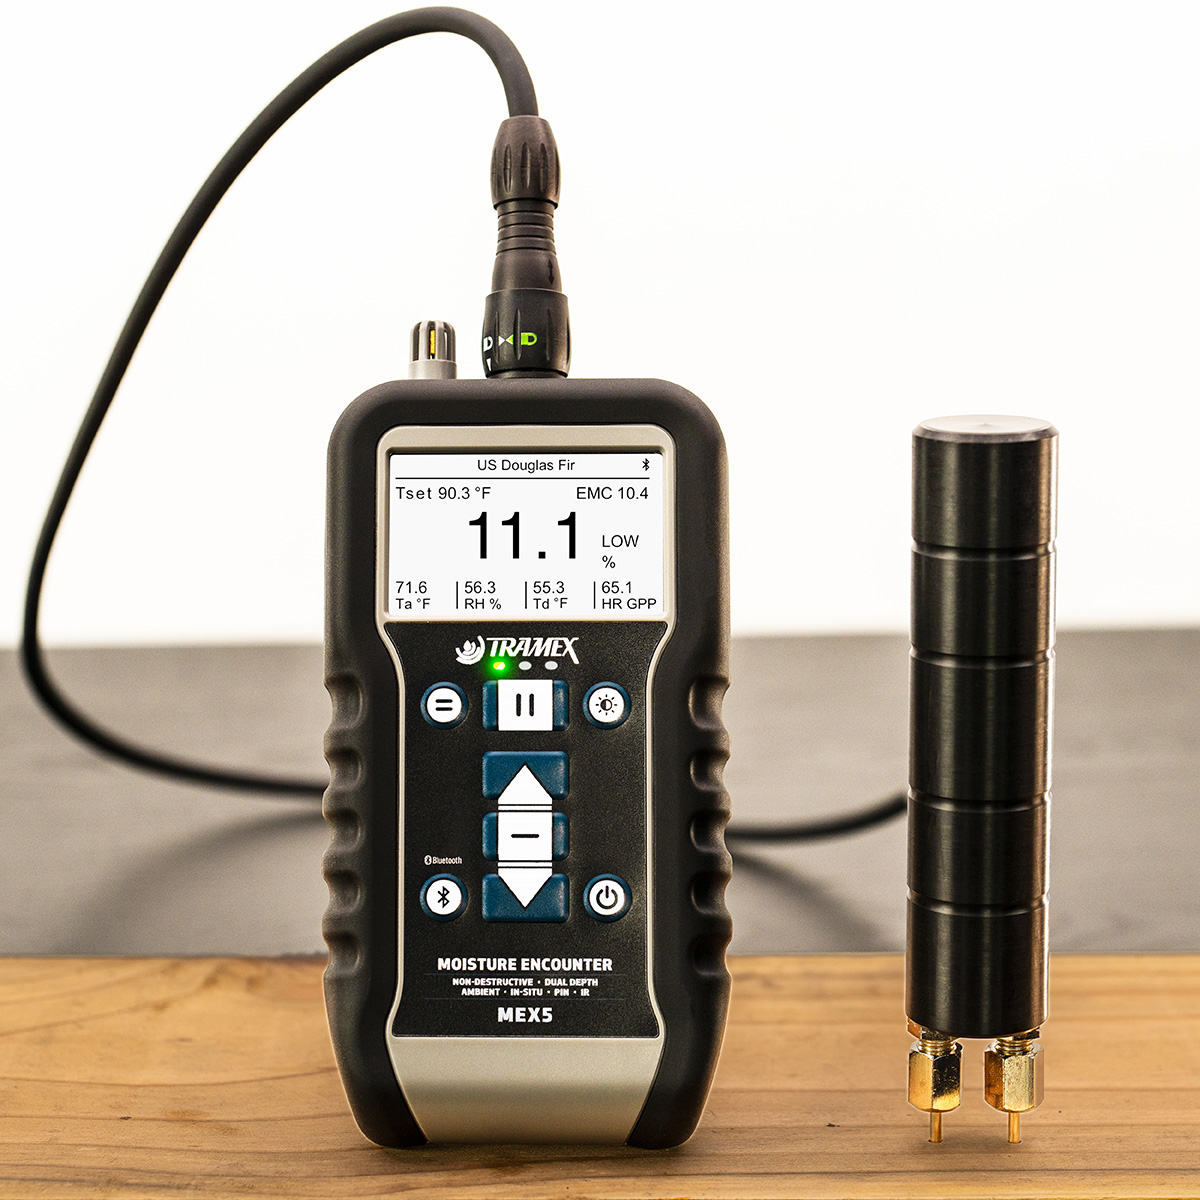 Measuring moisture content in floorboard with pin probe and Tramex Moisture Encounter MEX5